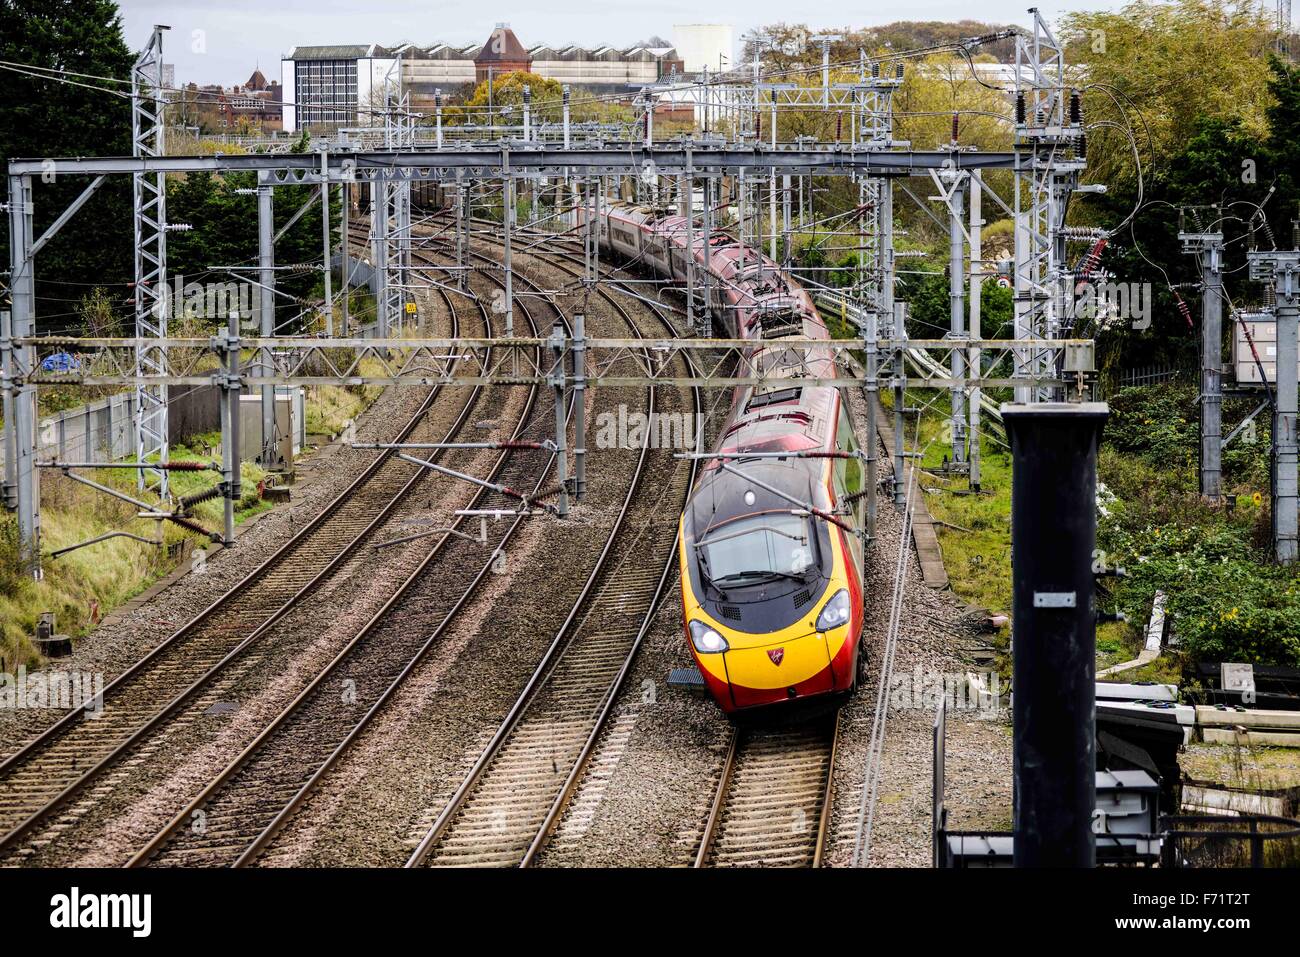 A Virgin Pendolino train tilting as it turns a corner on the tracks. Photographed in Warwickshire, UK. Stock Photo